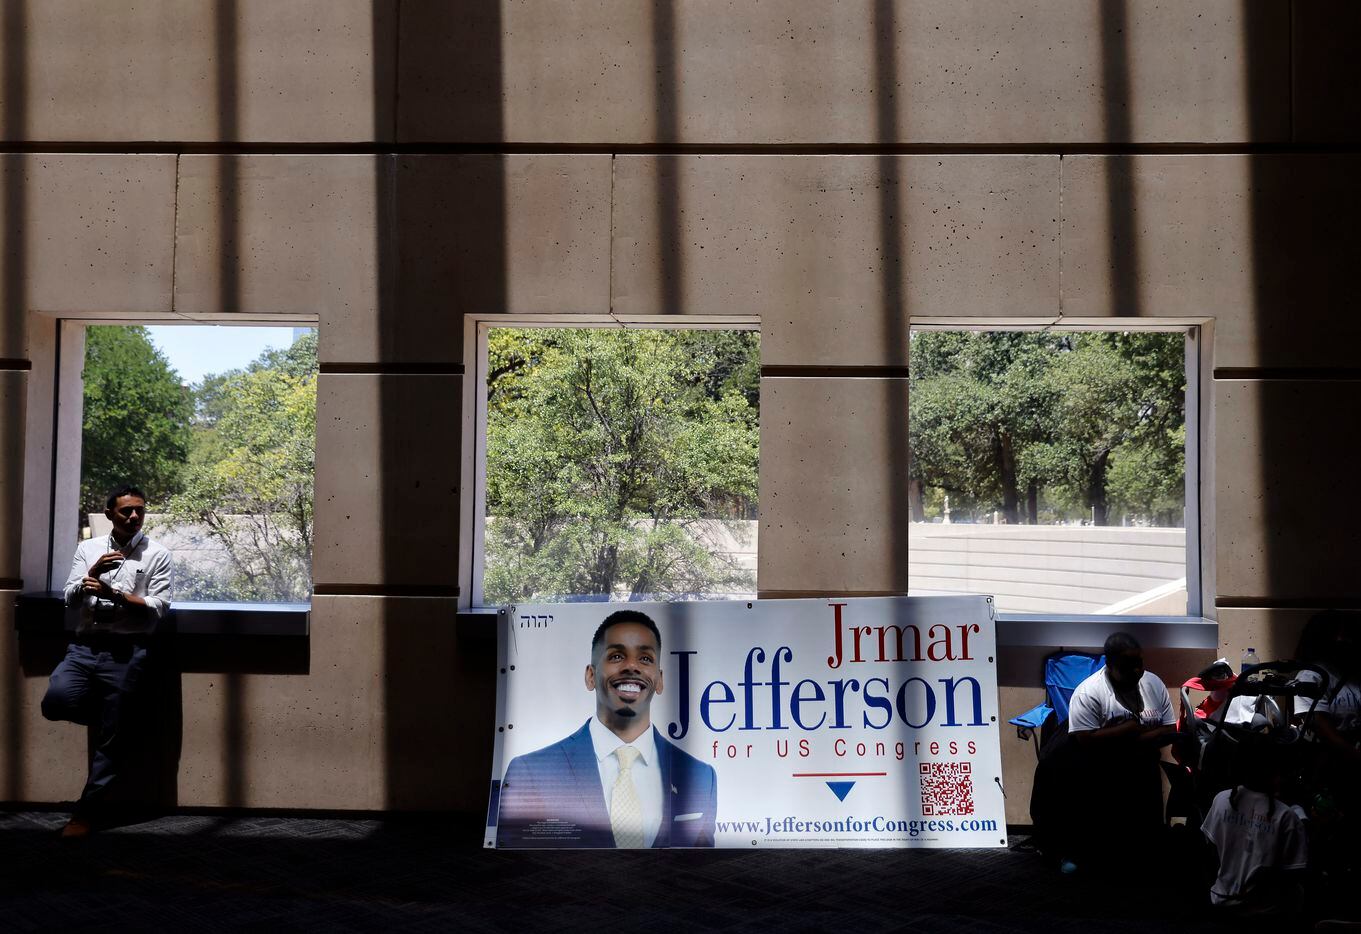 Supporters of Jrmar Jefferson placed a campaign sign in the hallway during the 2022 Texas...